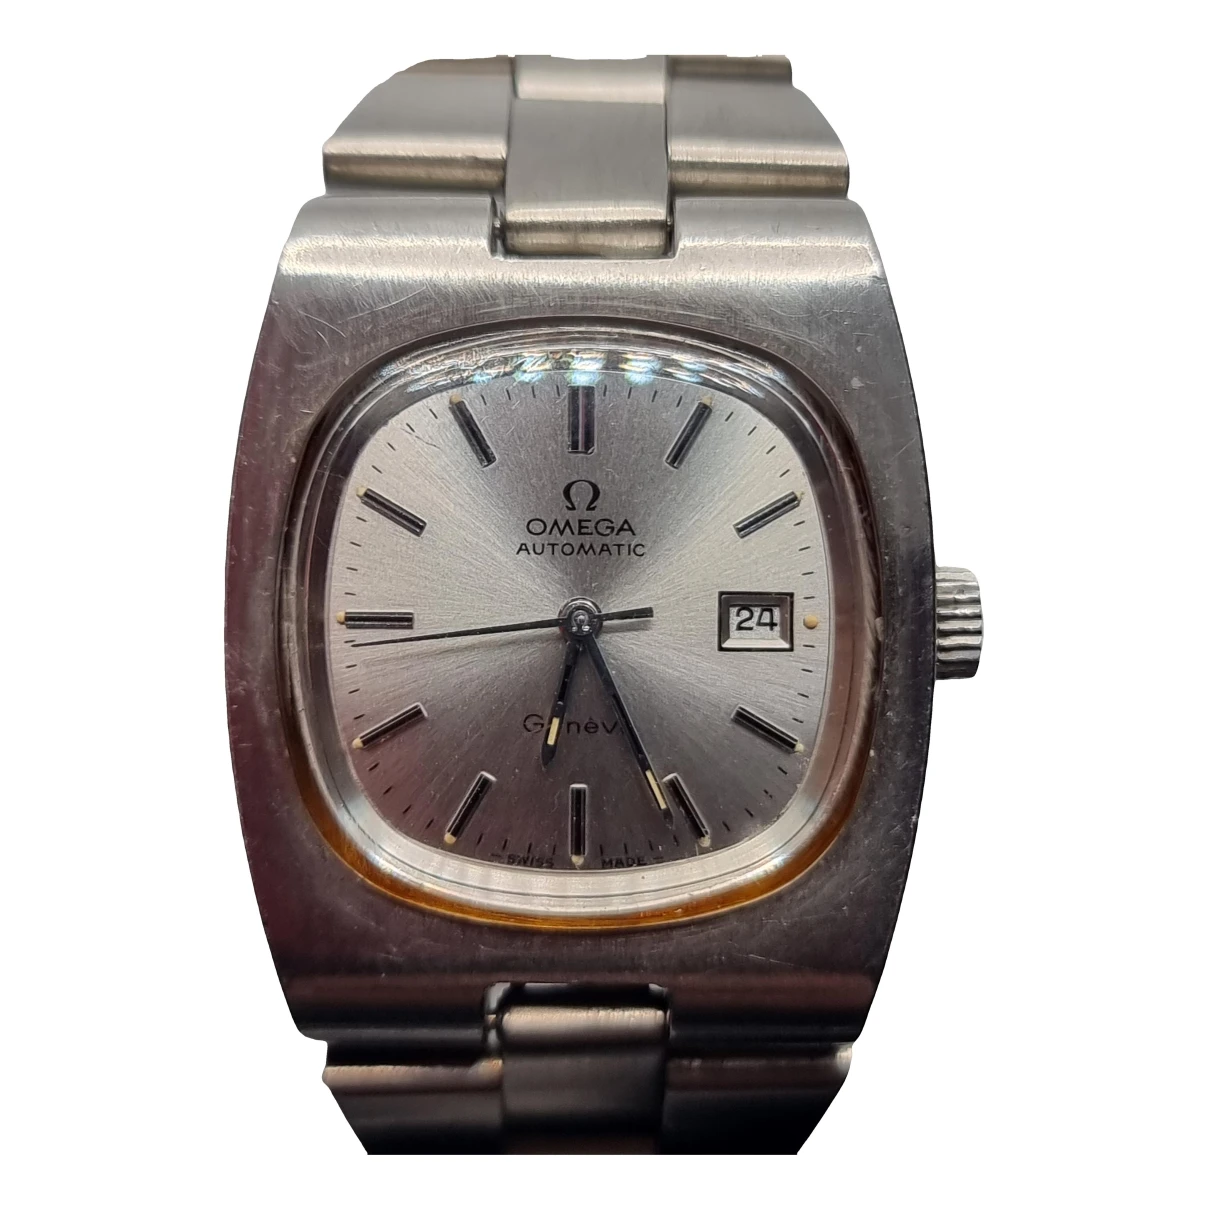 Pre-owned Omega Watch In Metallic